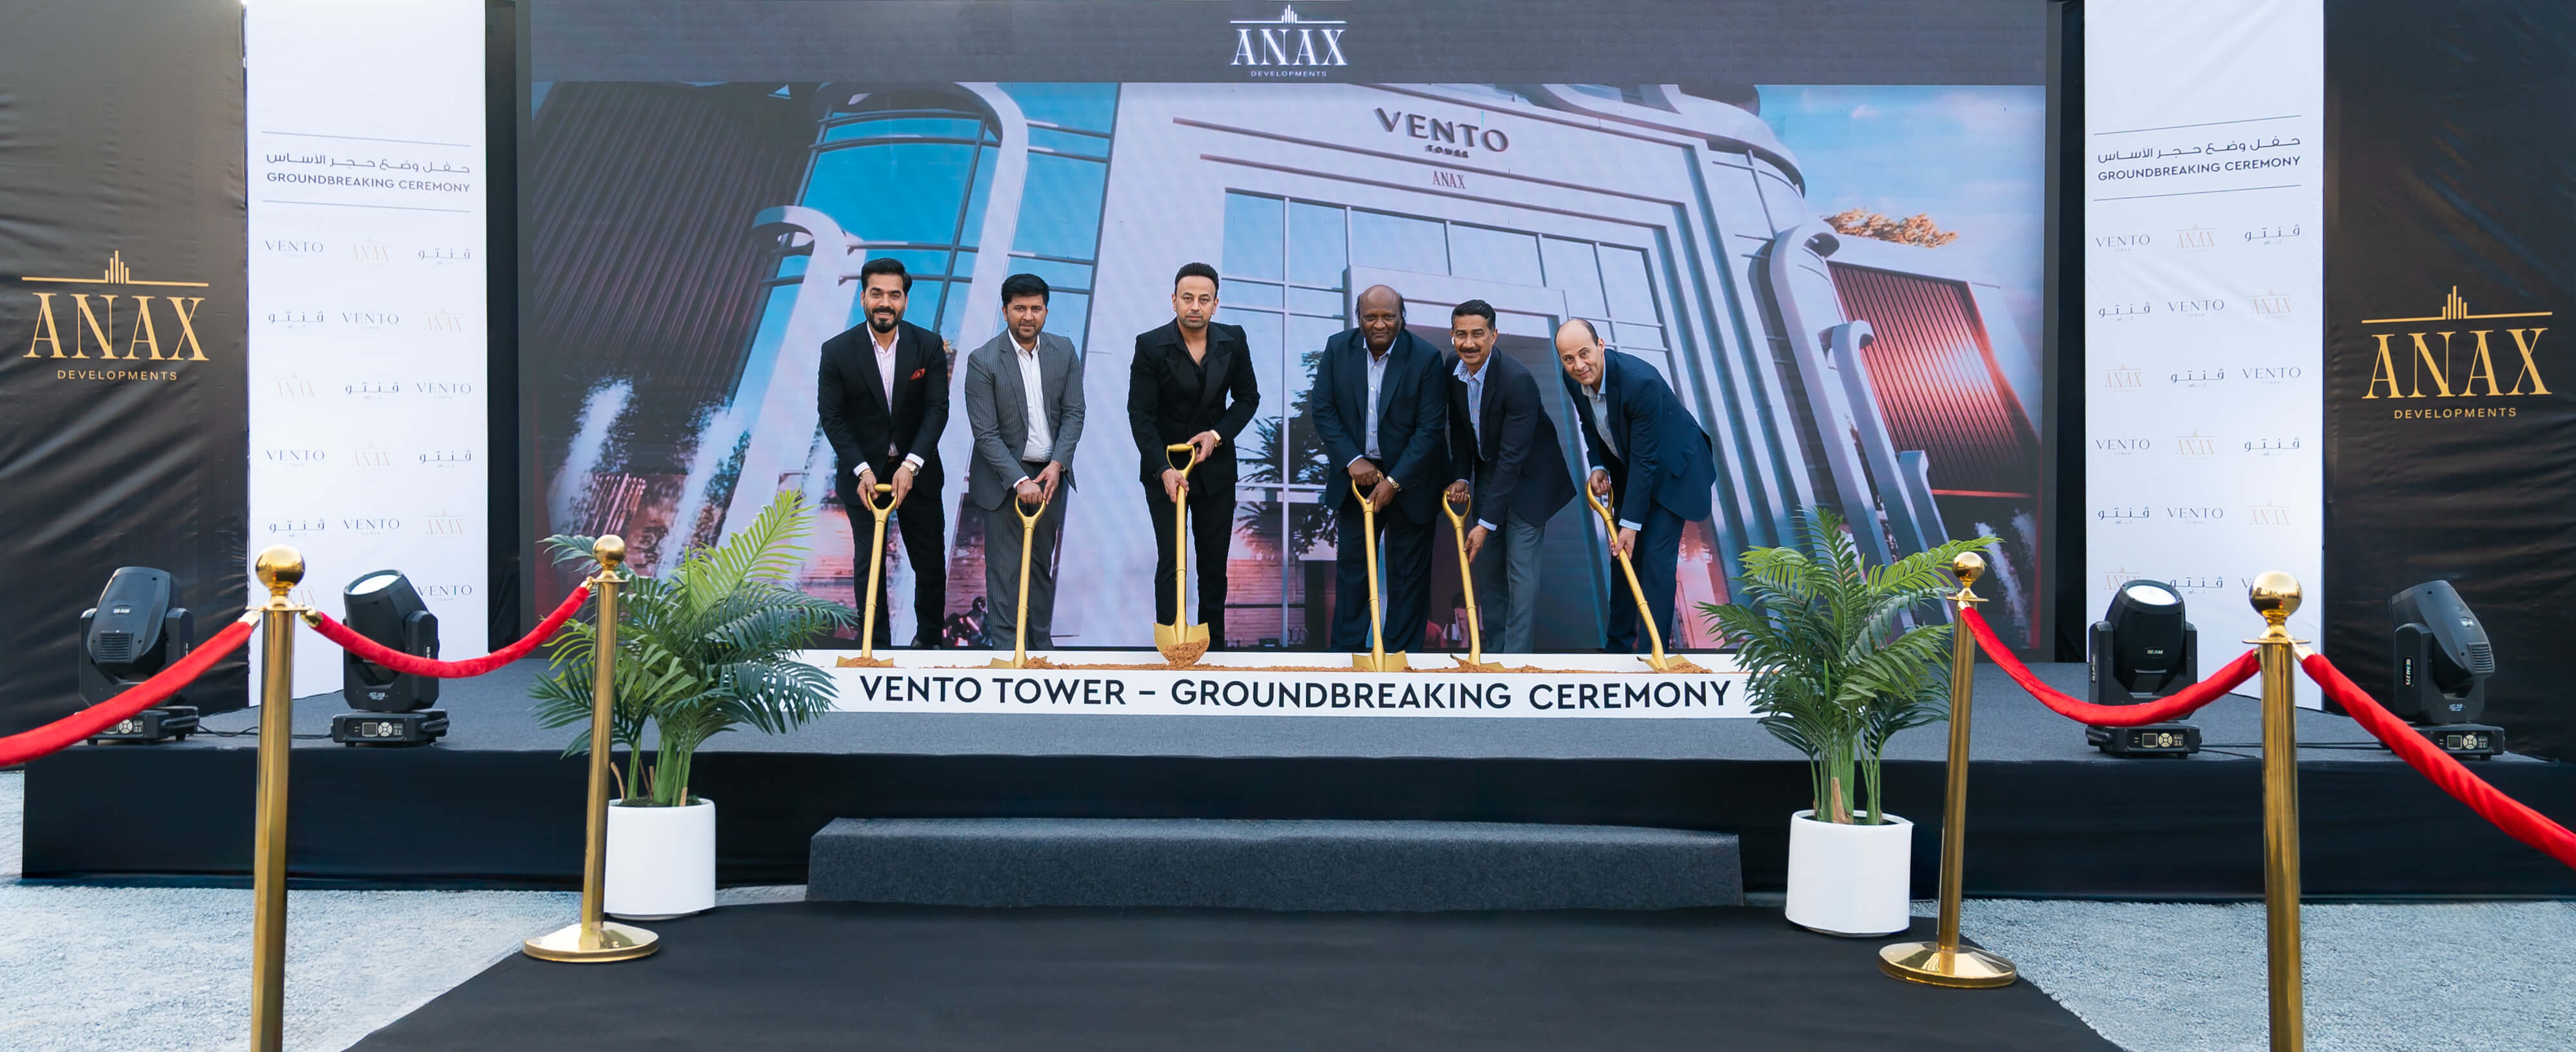 Groundbreaking Ceremony of Vento Tower by ANAX Developments Ushers in a New Era in Luxury Living in Dubai